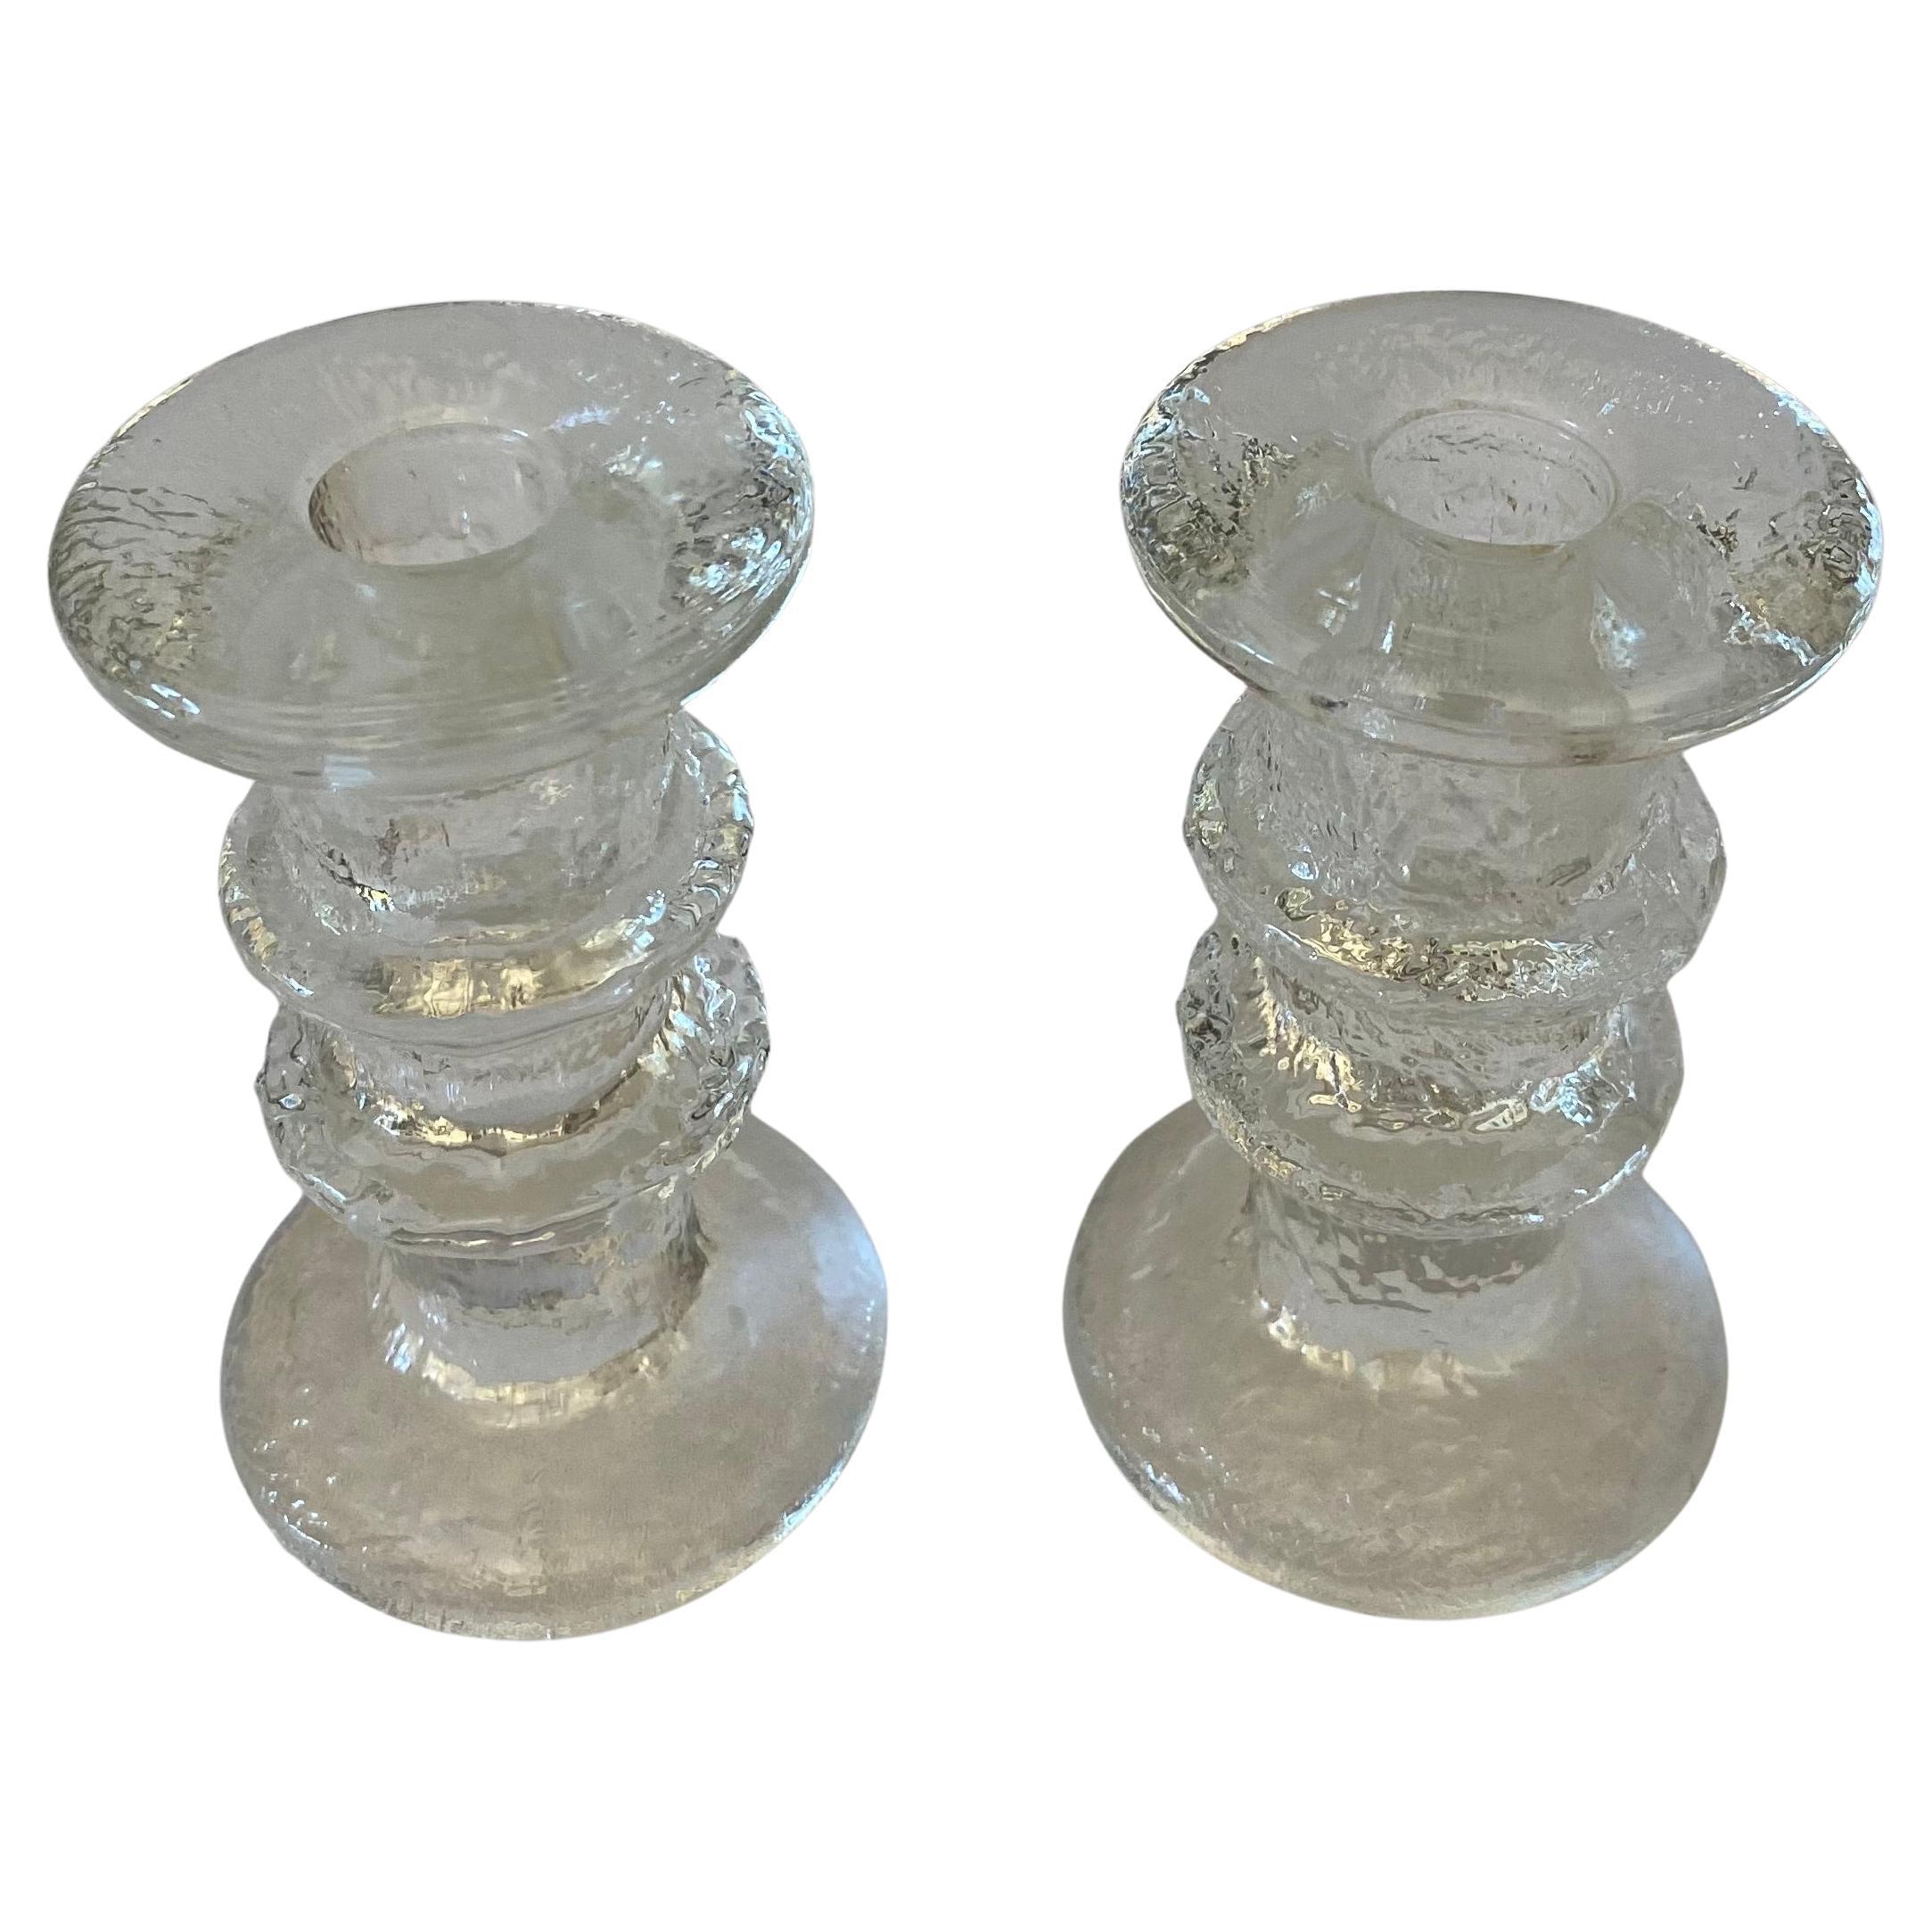 Pair of Small Kosta Boda Clear Glass Candleholders